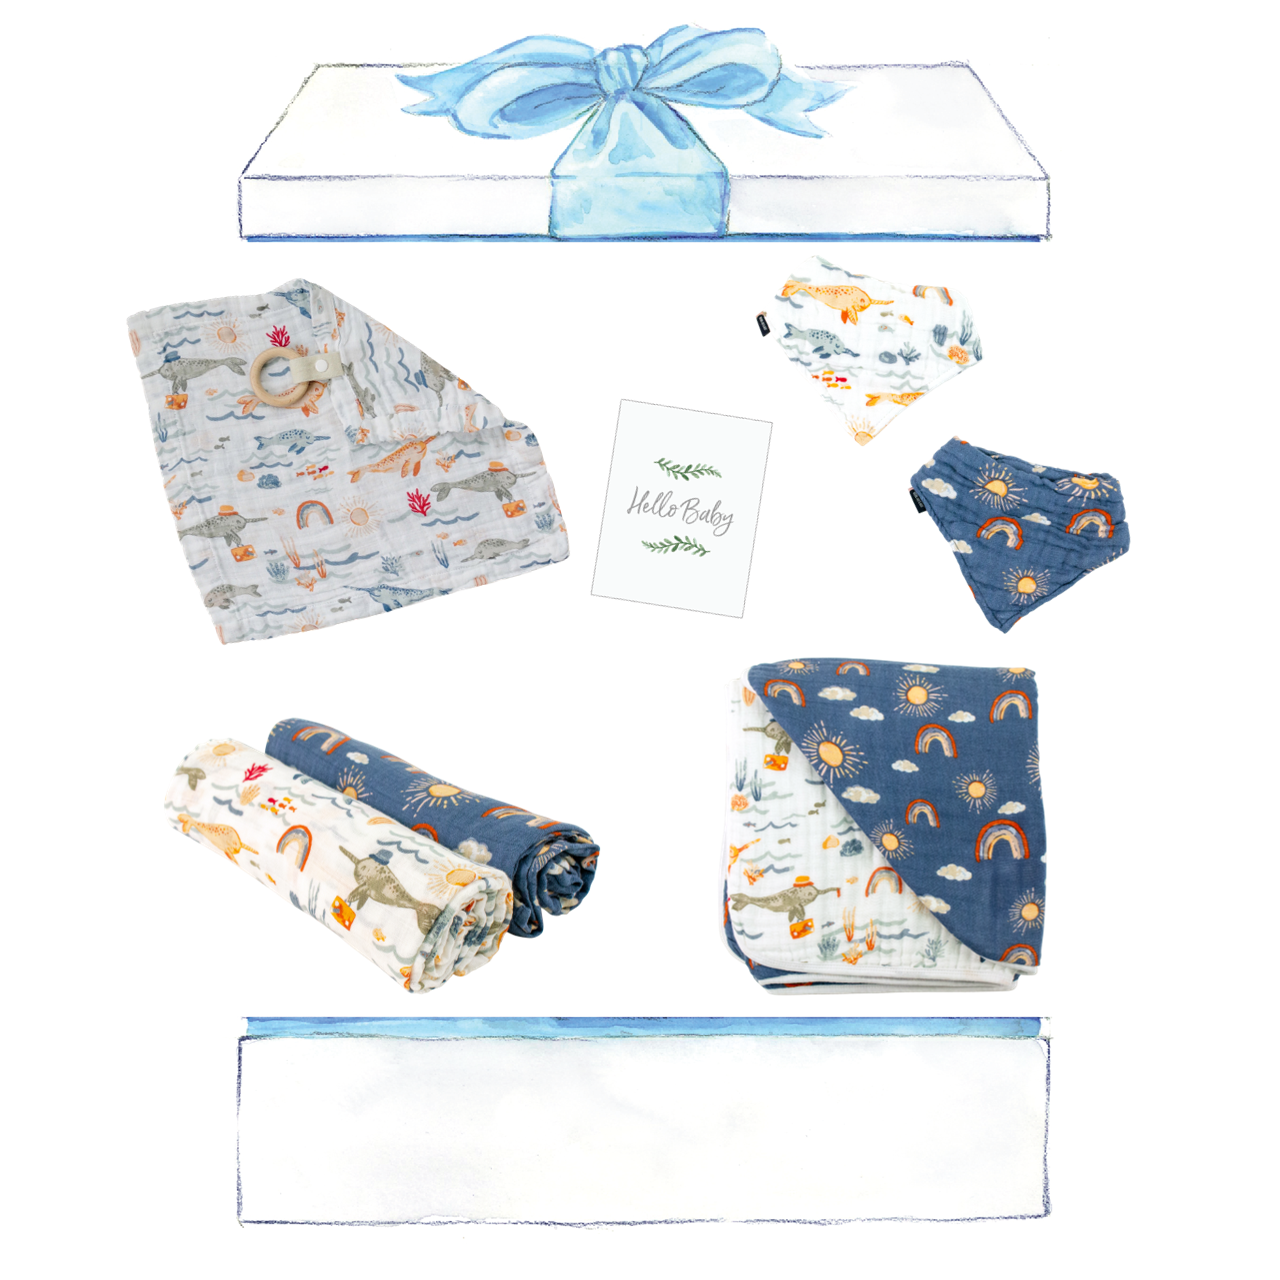 Sunny Narwhal Baby Box - Favorites